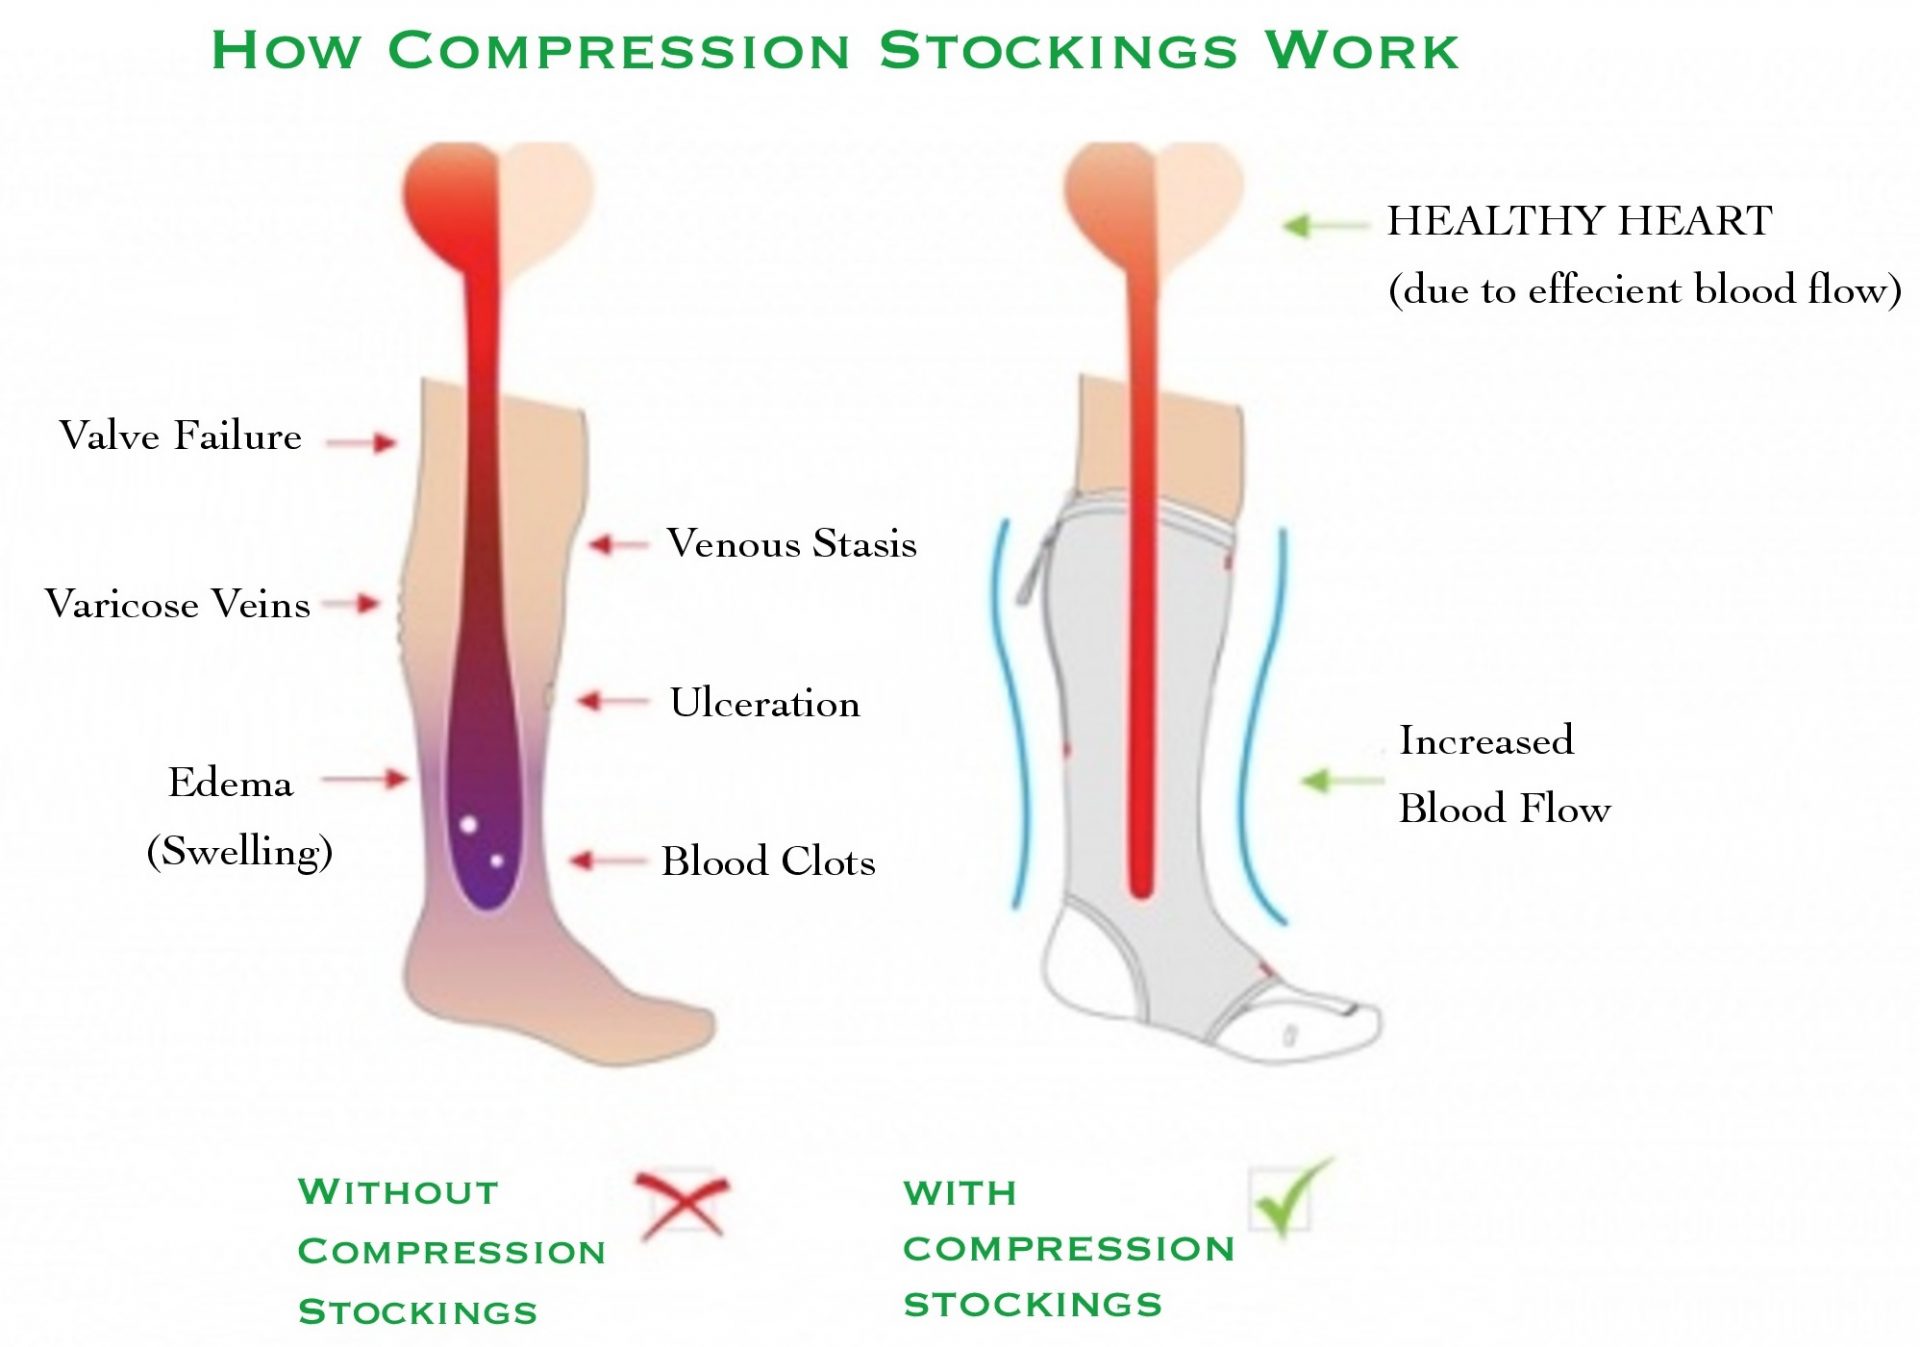 Compression Socks for Varicose Veins: Can They Help Reduce